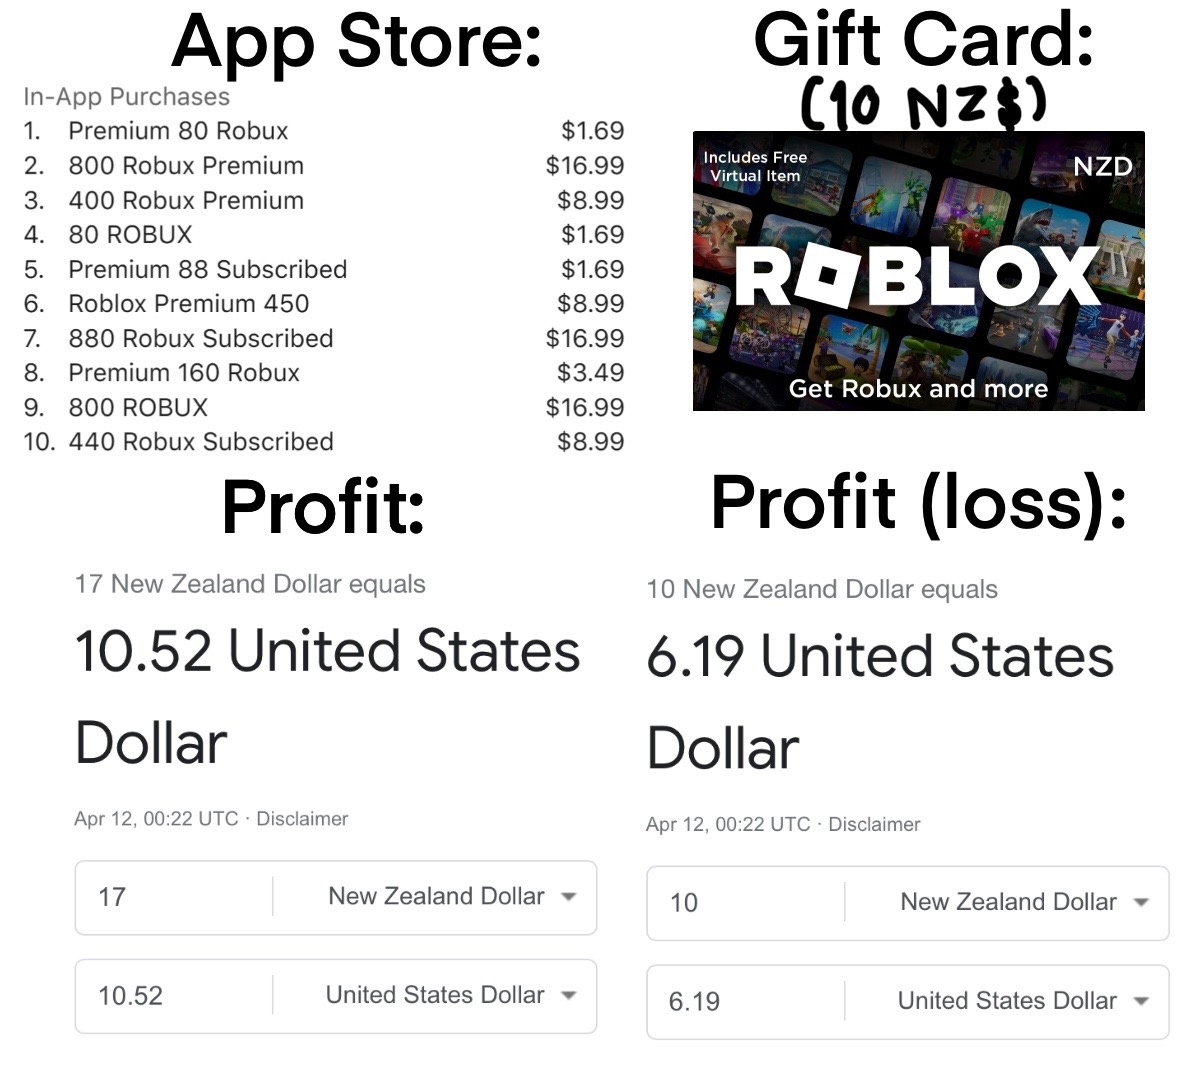 Roblox Gift Cards - They're Changing? - General - Cookie Tech